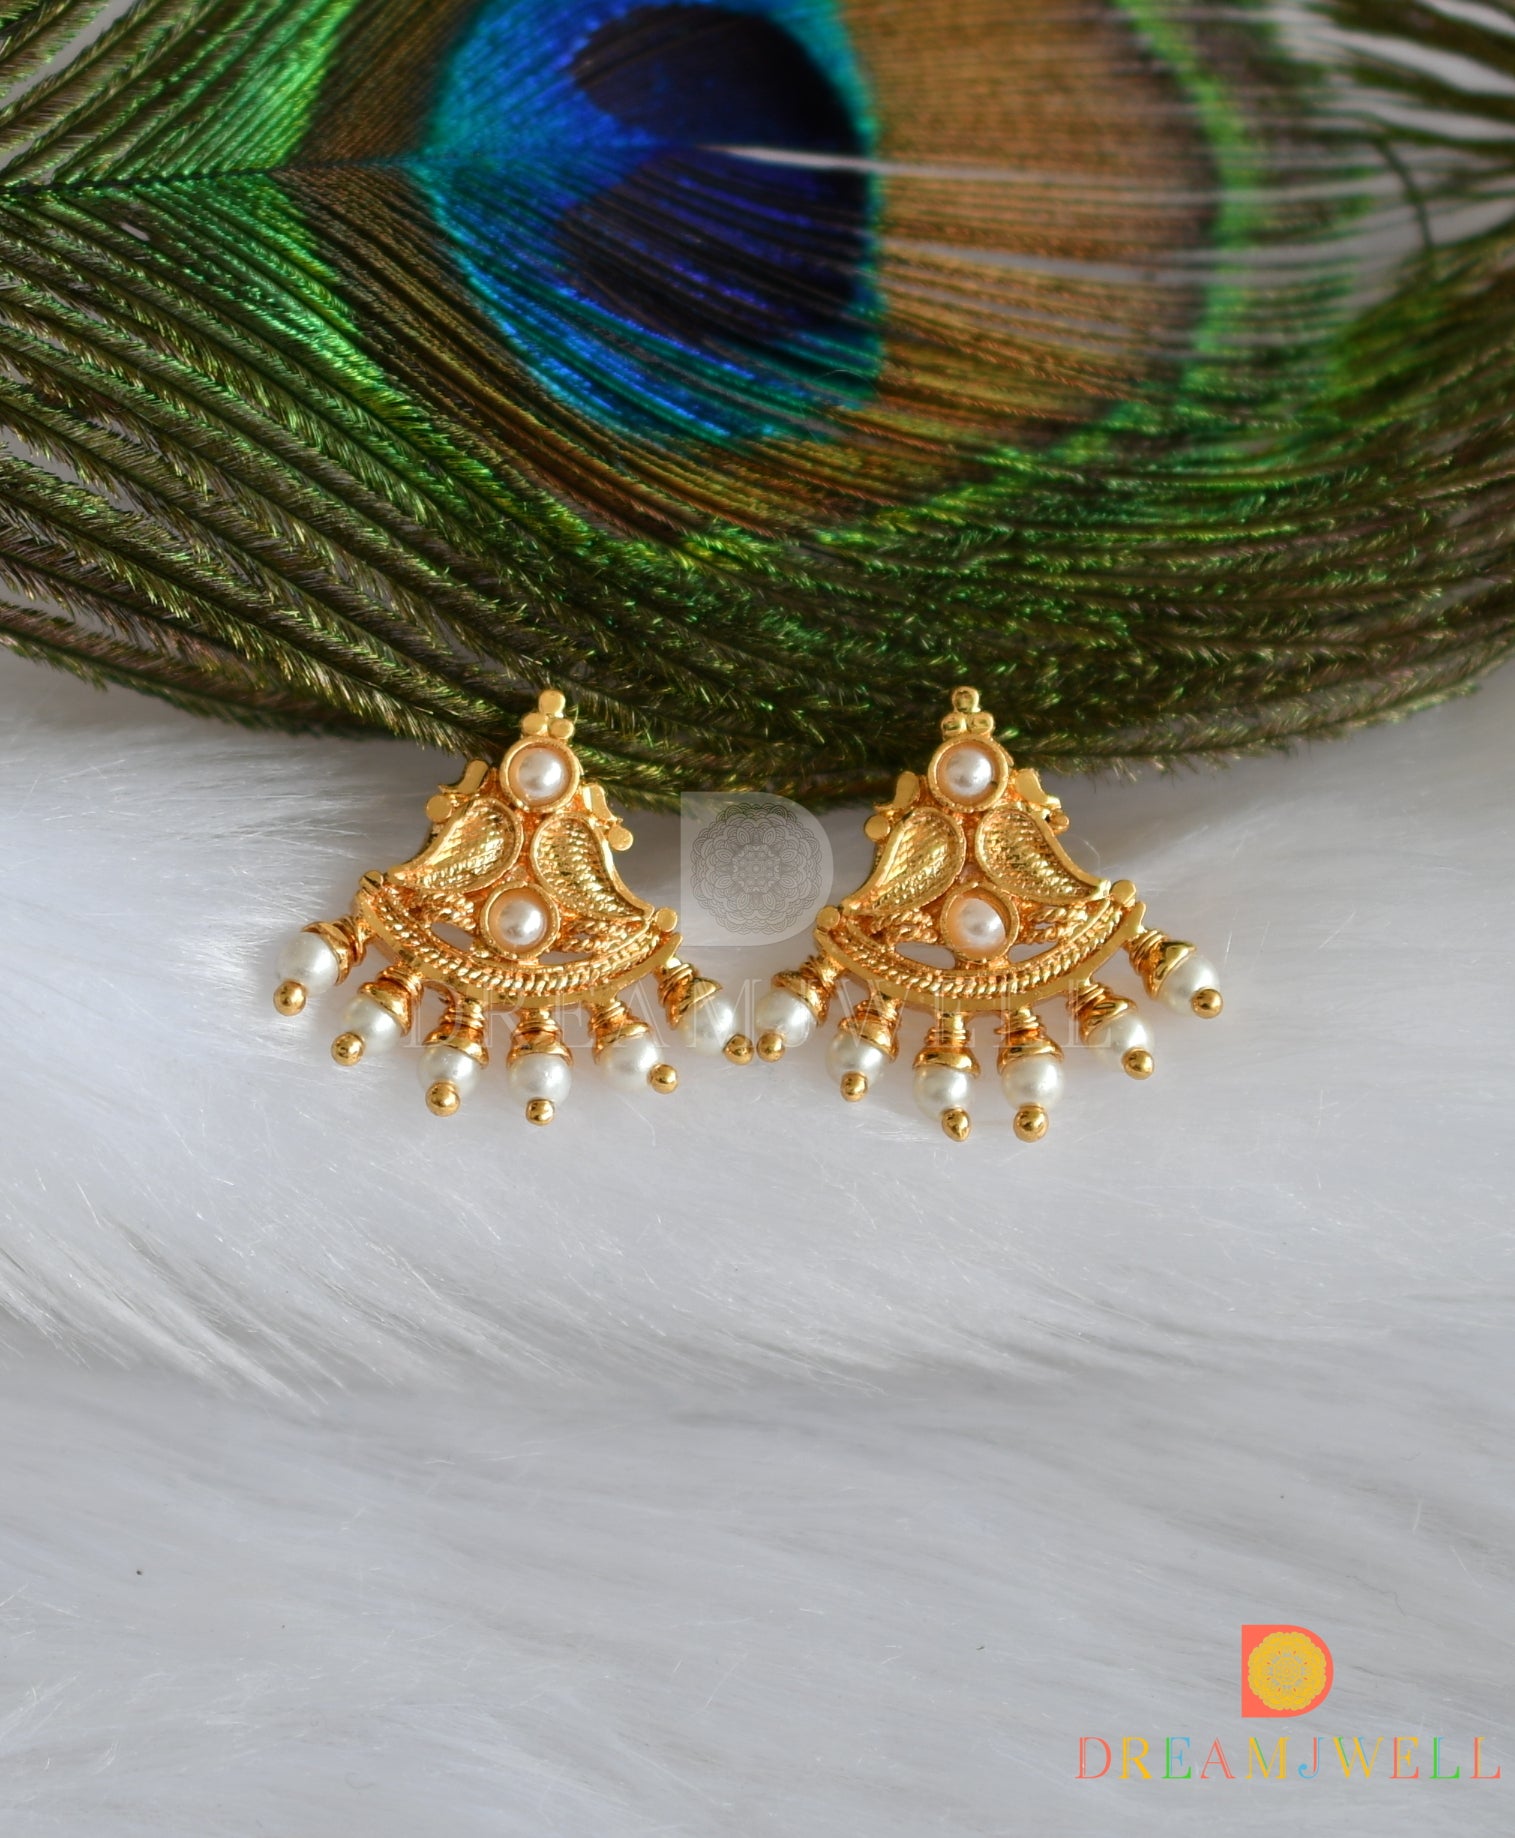 Awesome Mango Earrings - chendhur collections